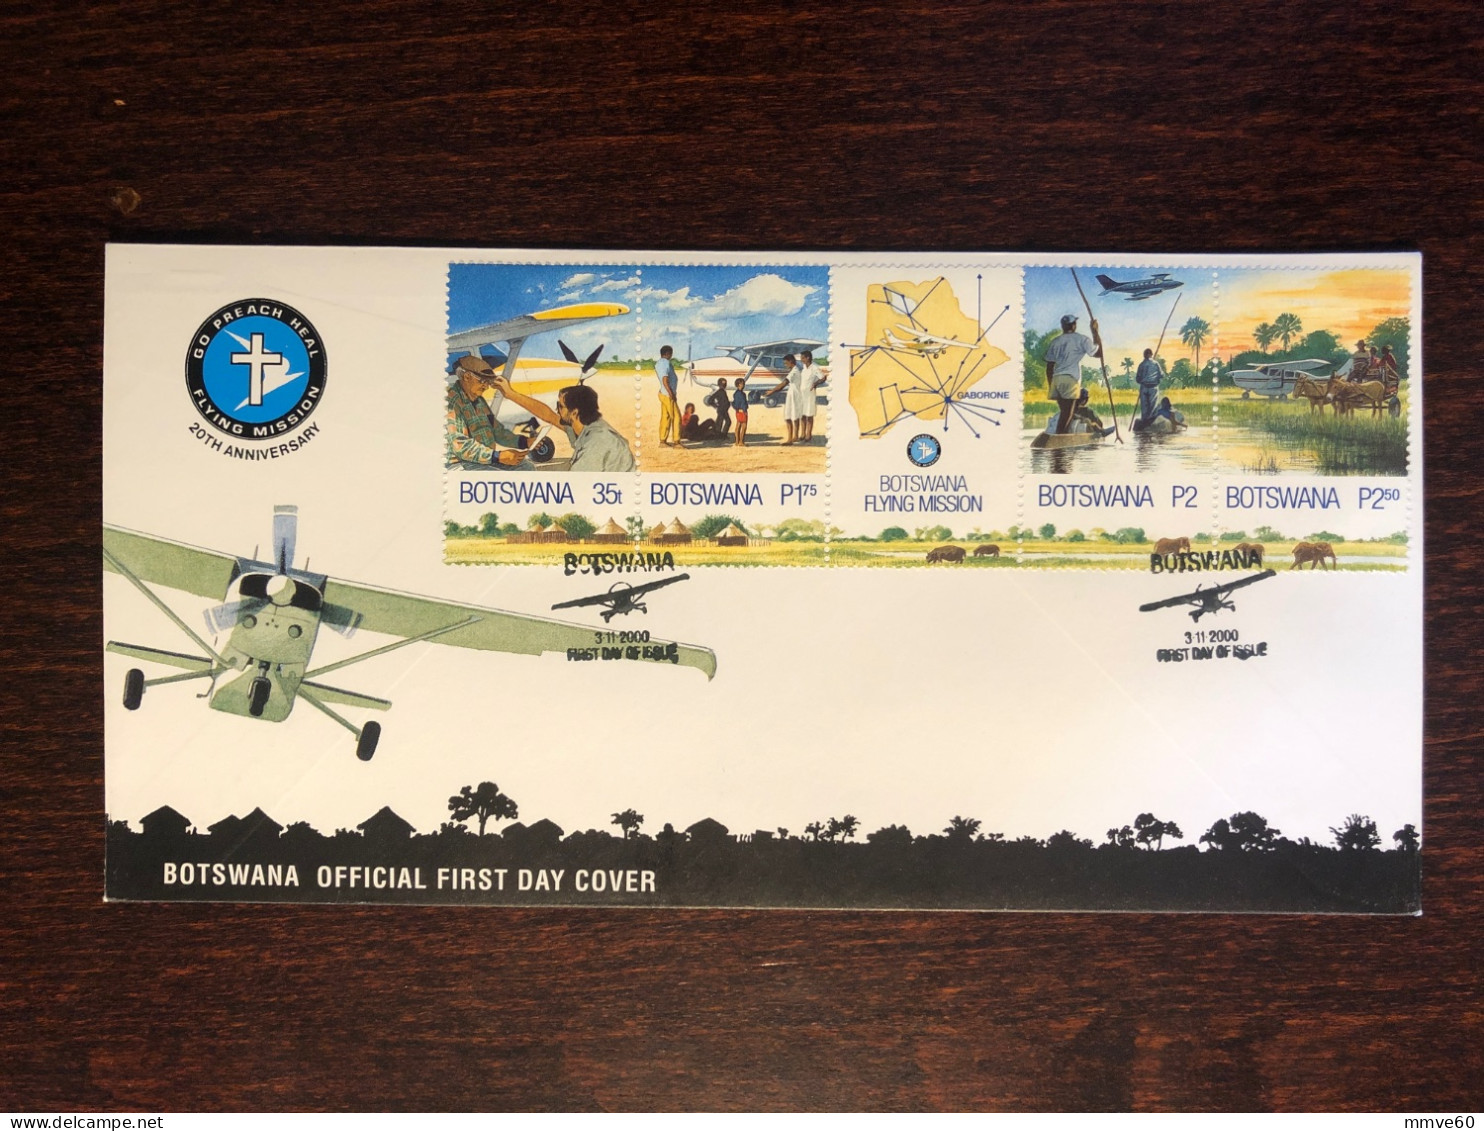 BOTSWANA FDC COVER 2000 YEAR FLYING MISSION DOCTORS HEALTH MEDICINE STAMPS - Bophuthatswana